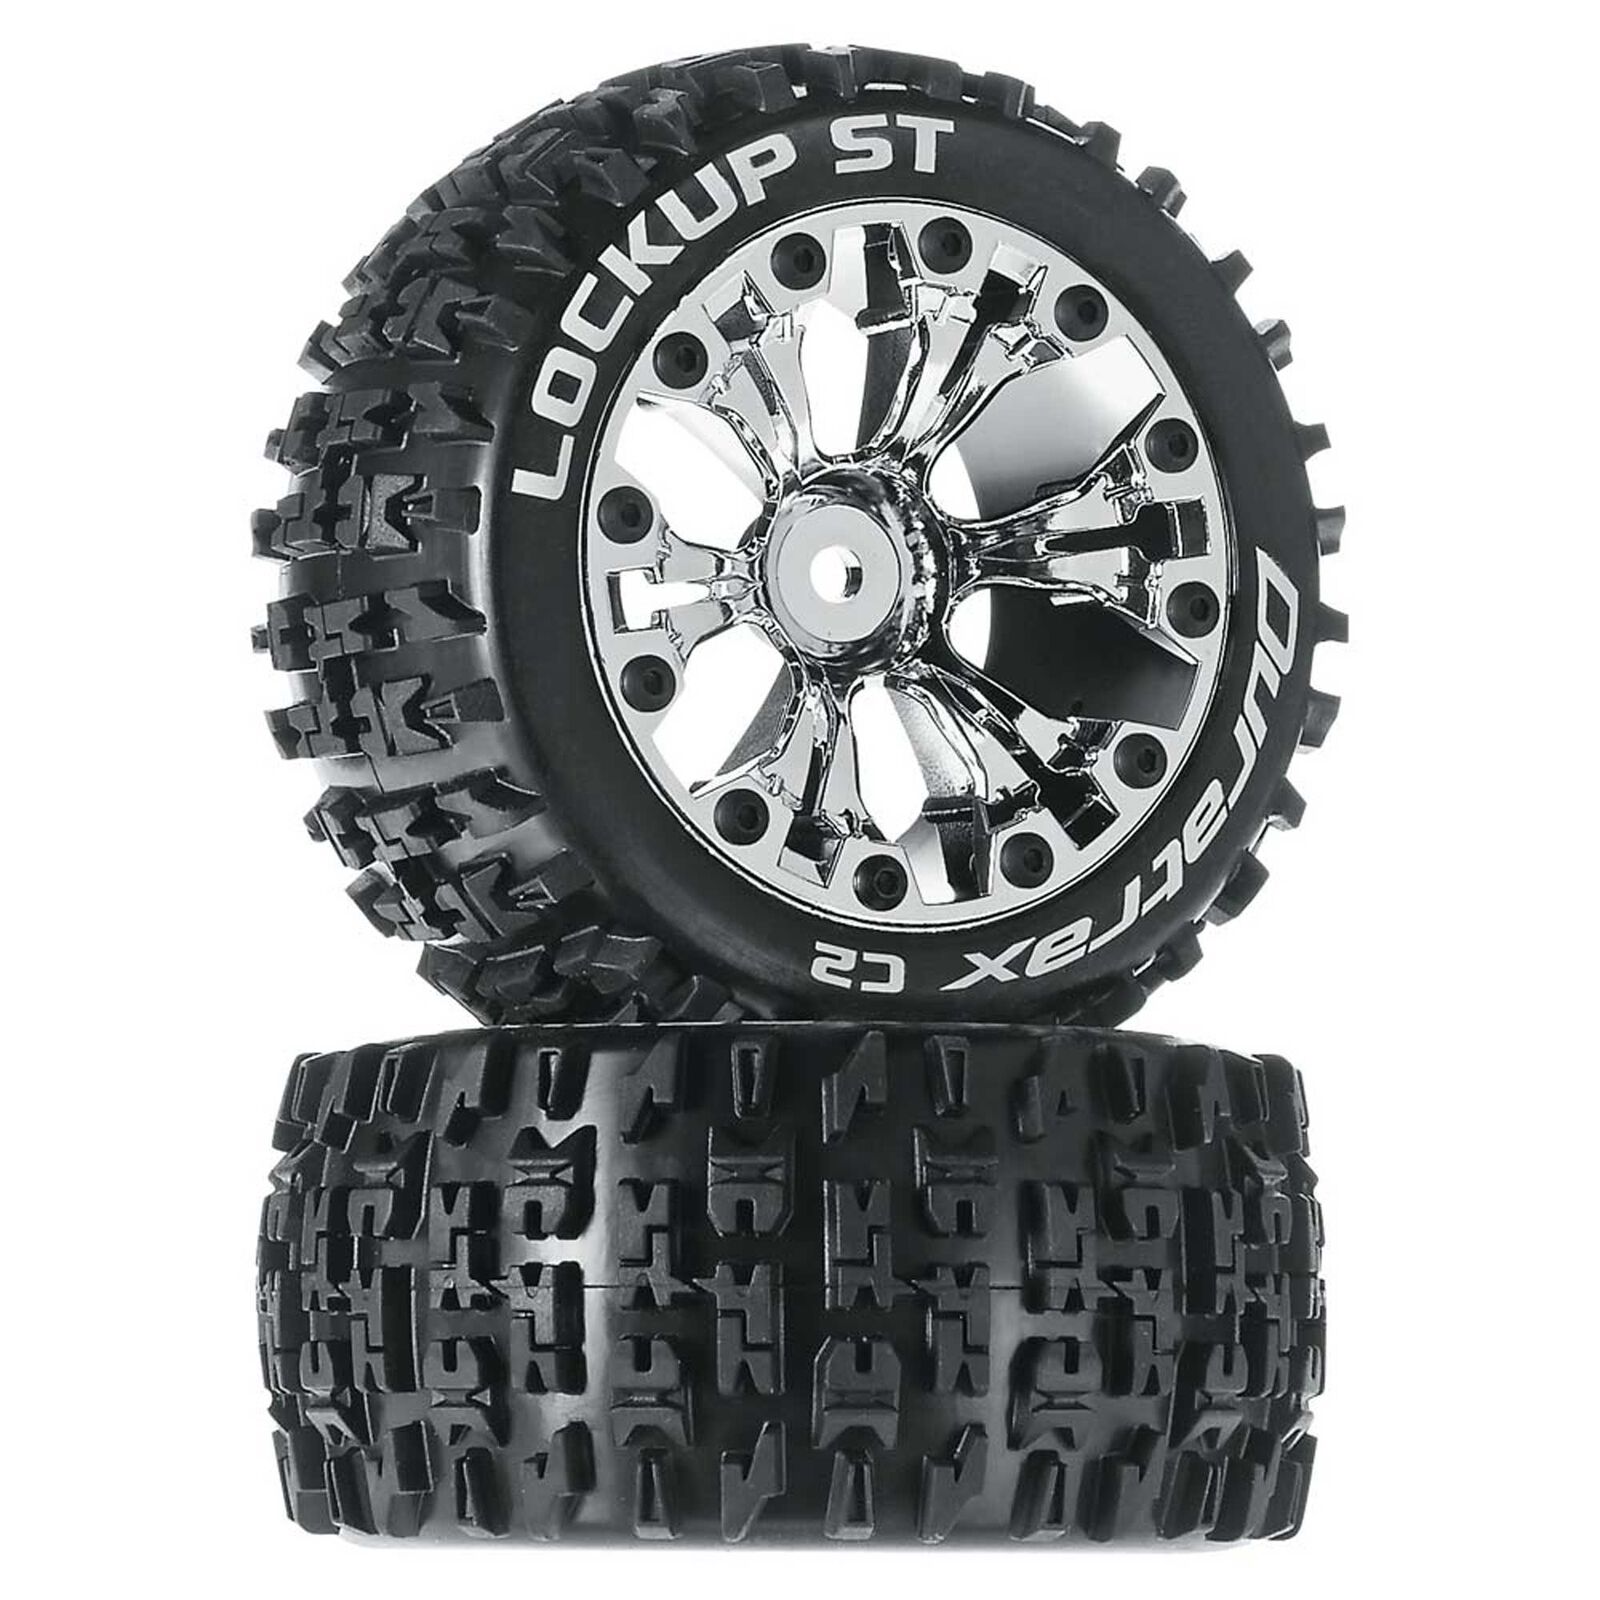 Lockup ST 2.8" 2WD Mounted Rear Tires, Chrome (2)